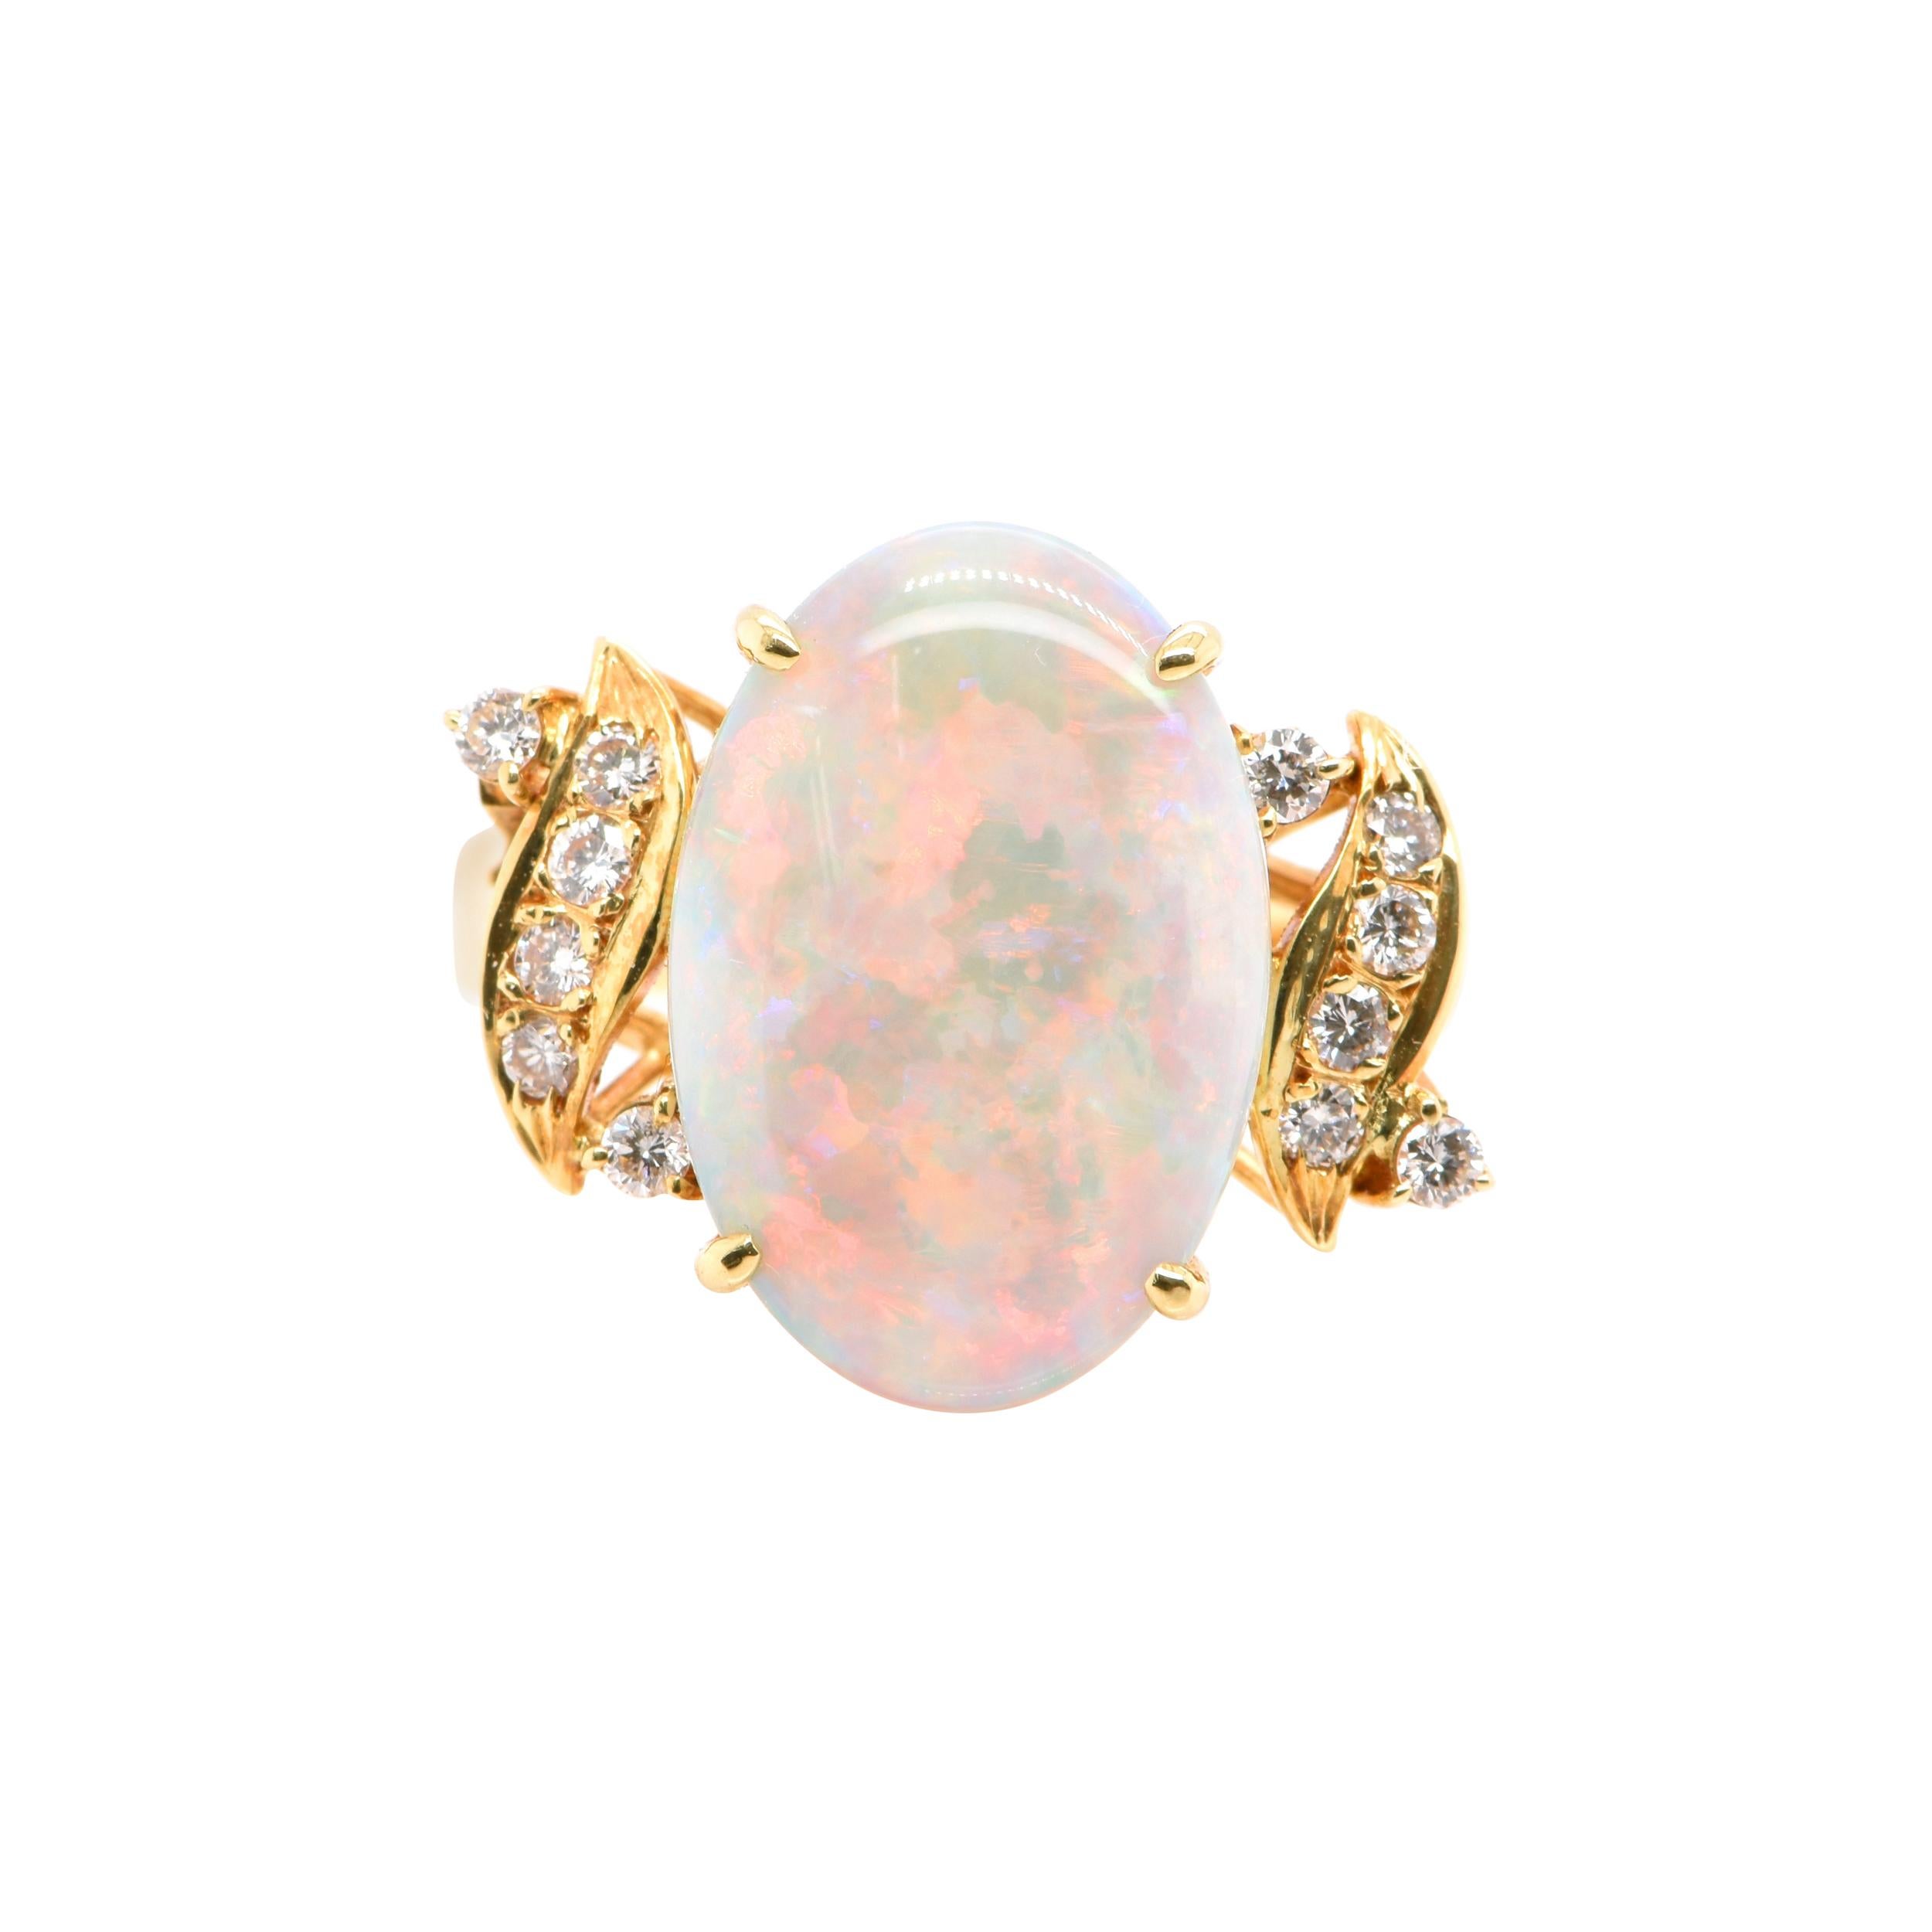 Natural White Opal and Diamond Ring Set in 18k Yellow Gold